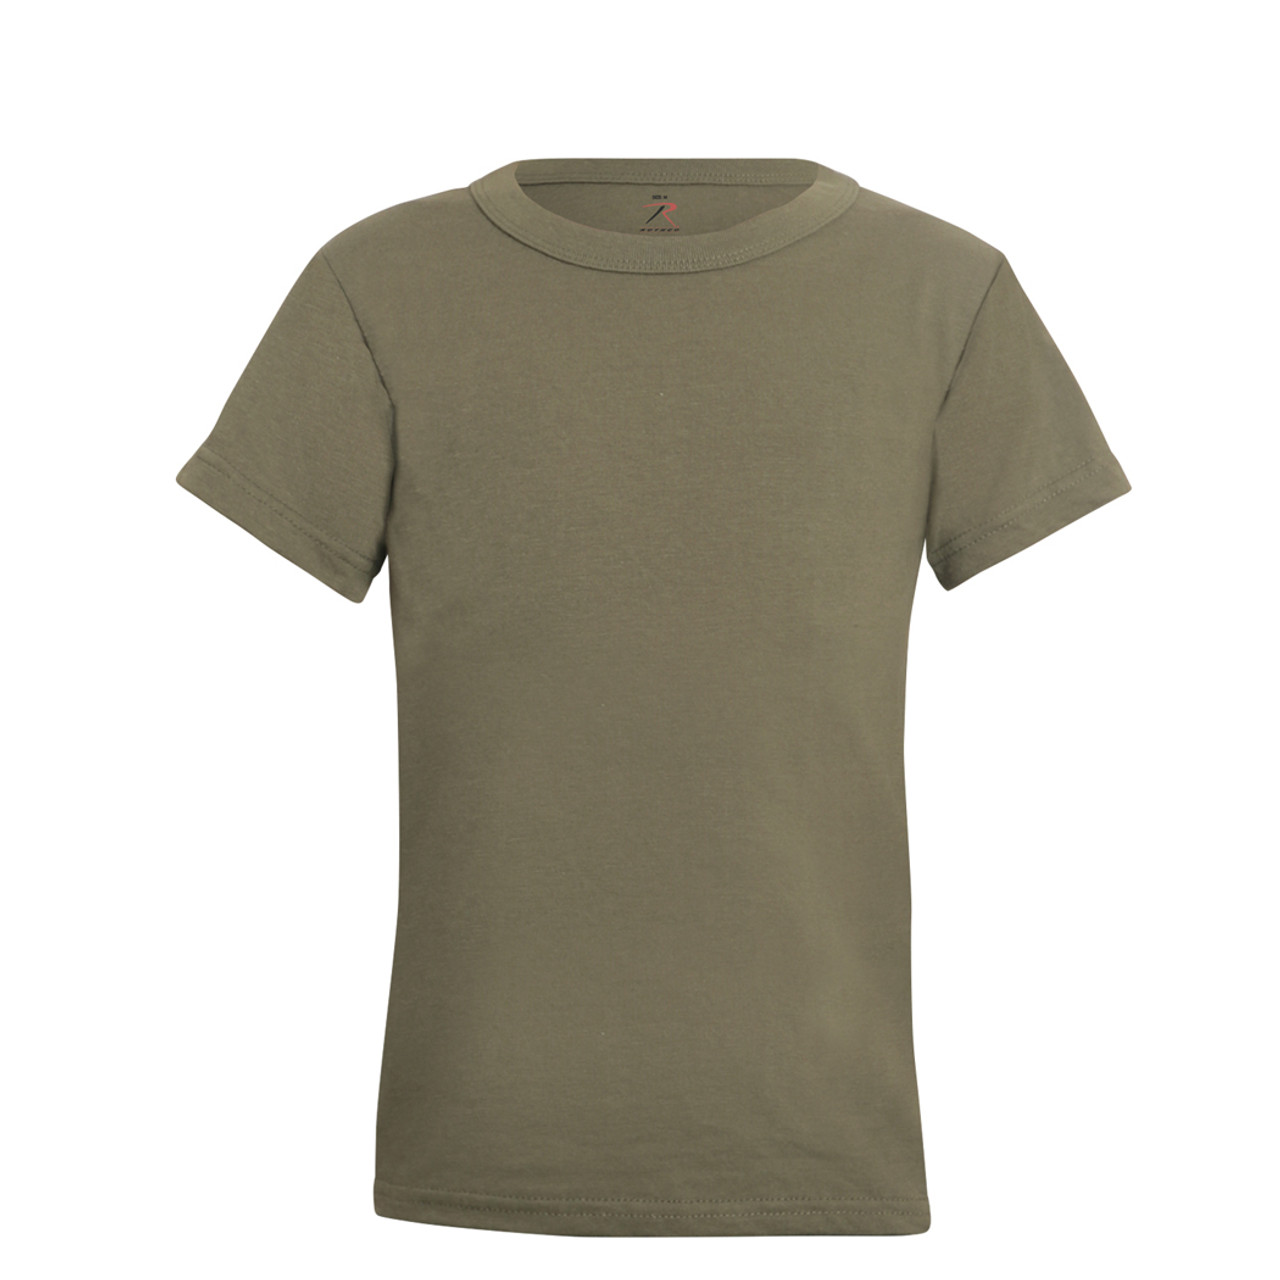 PG Military Coyote T-Shirt